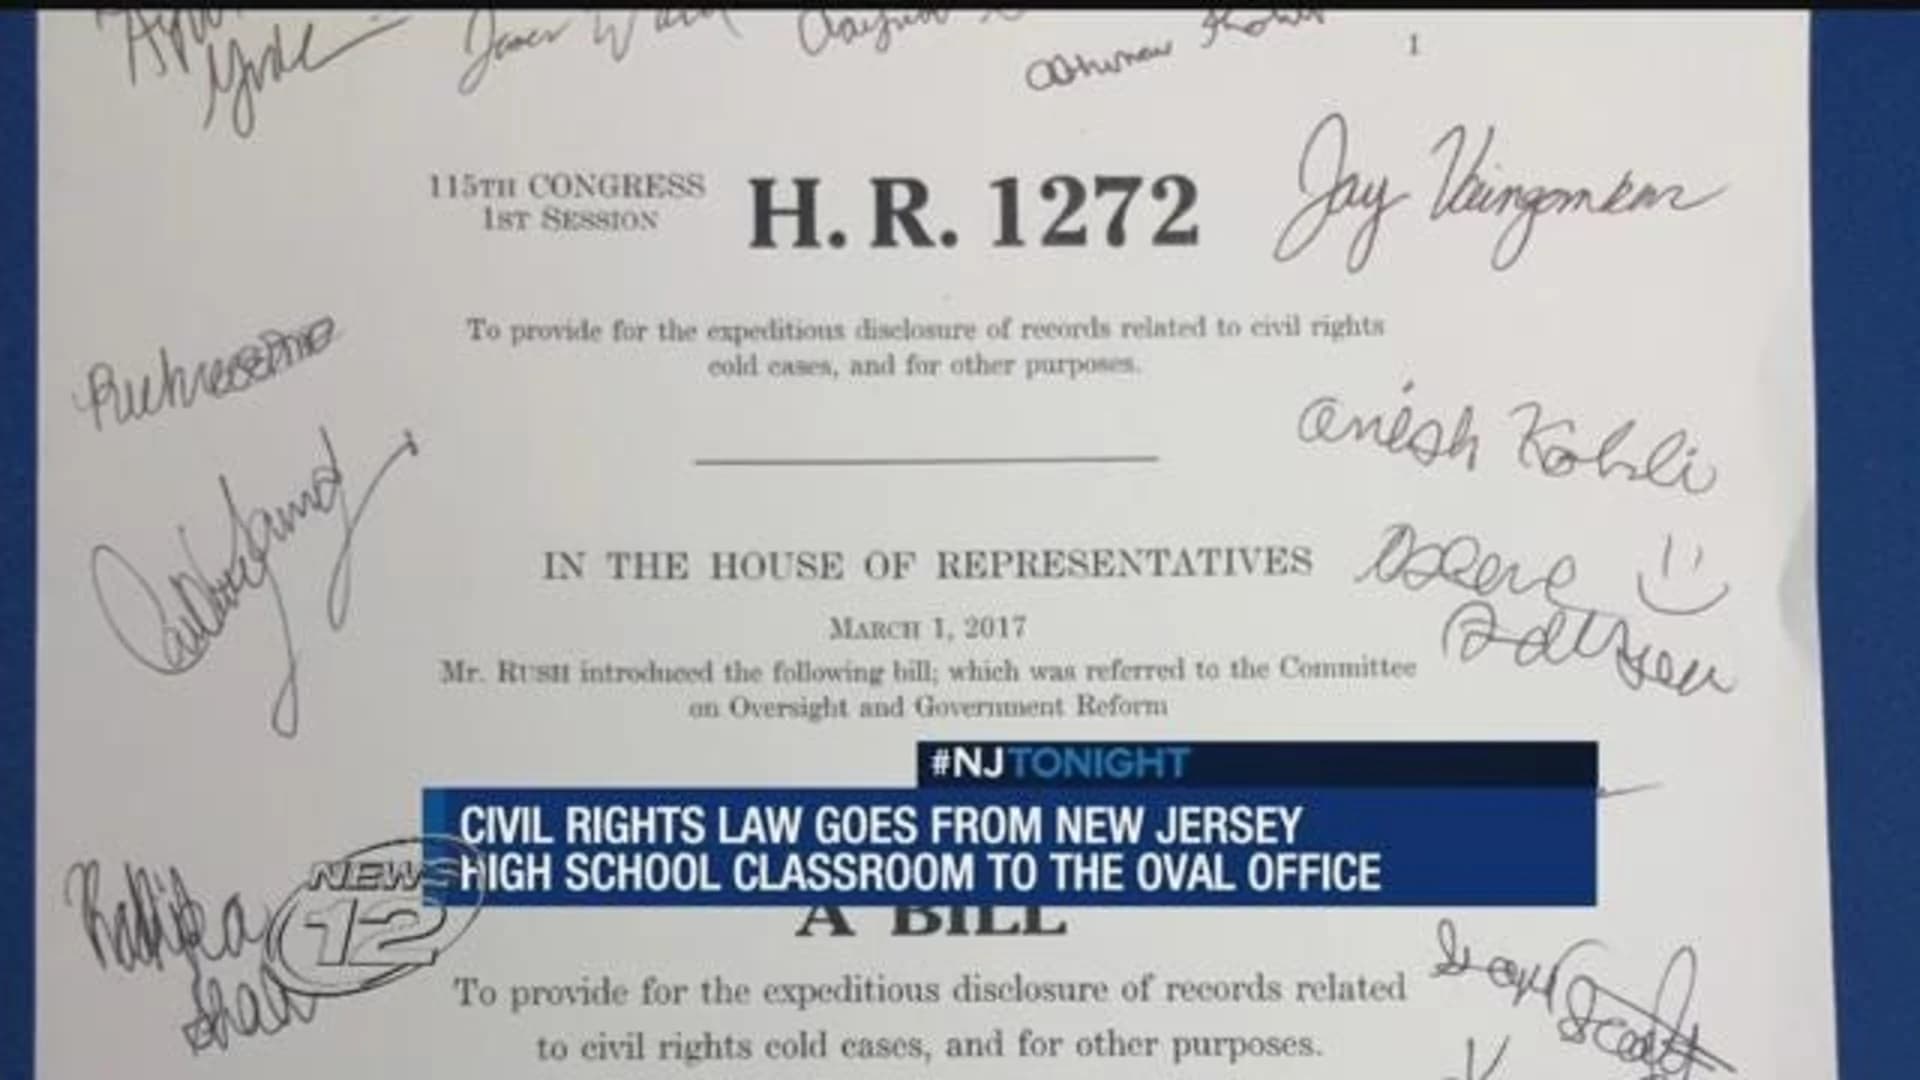 NJ high school students draft bill that was signed by President Trump into law